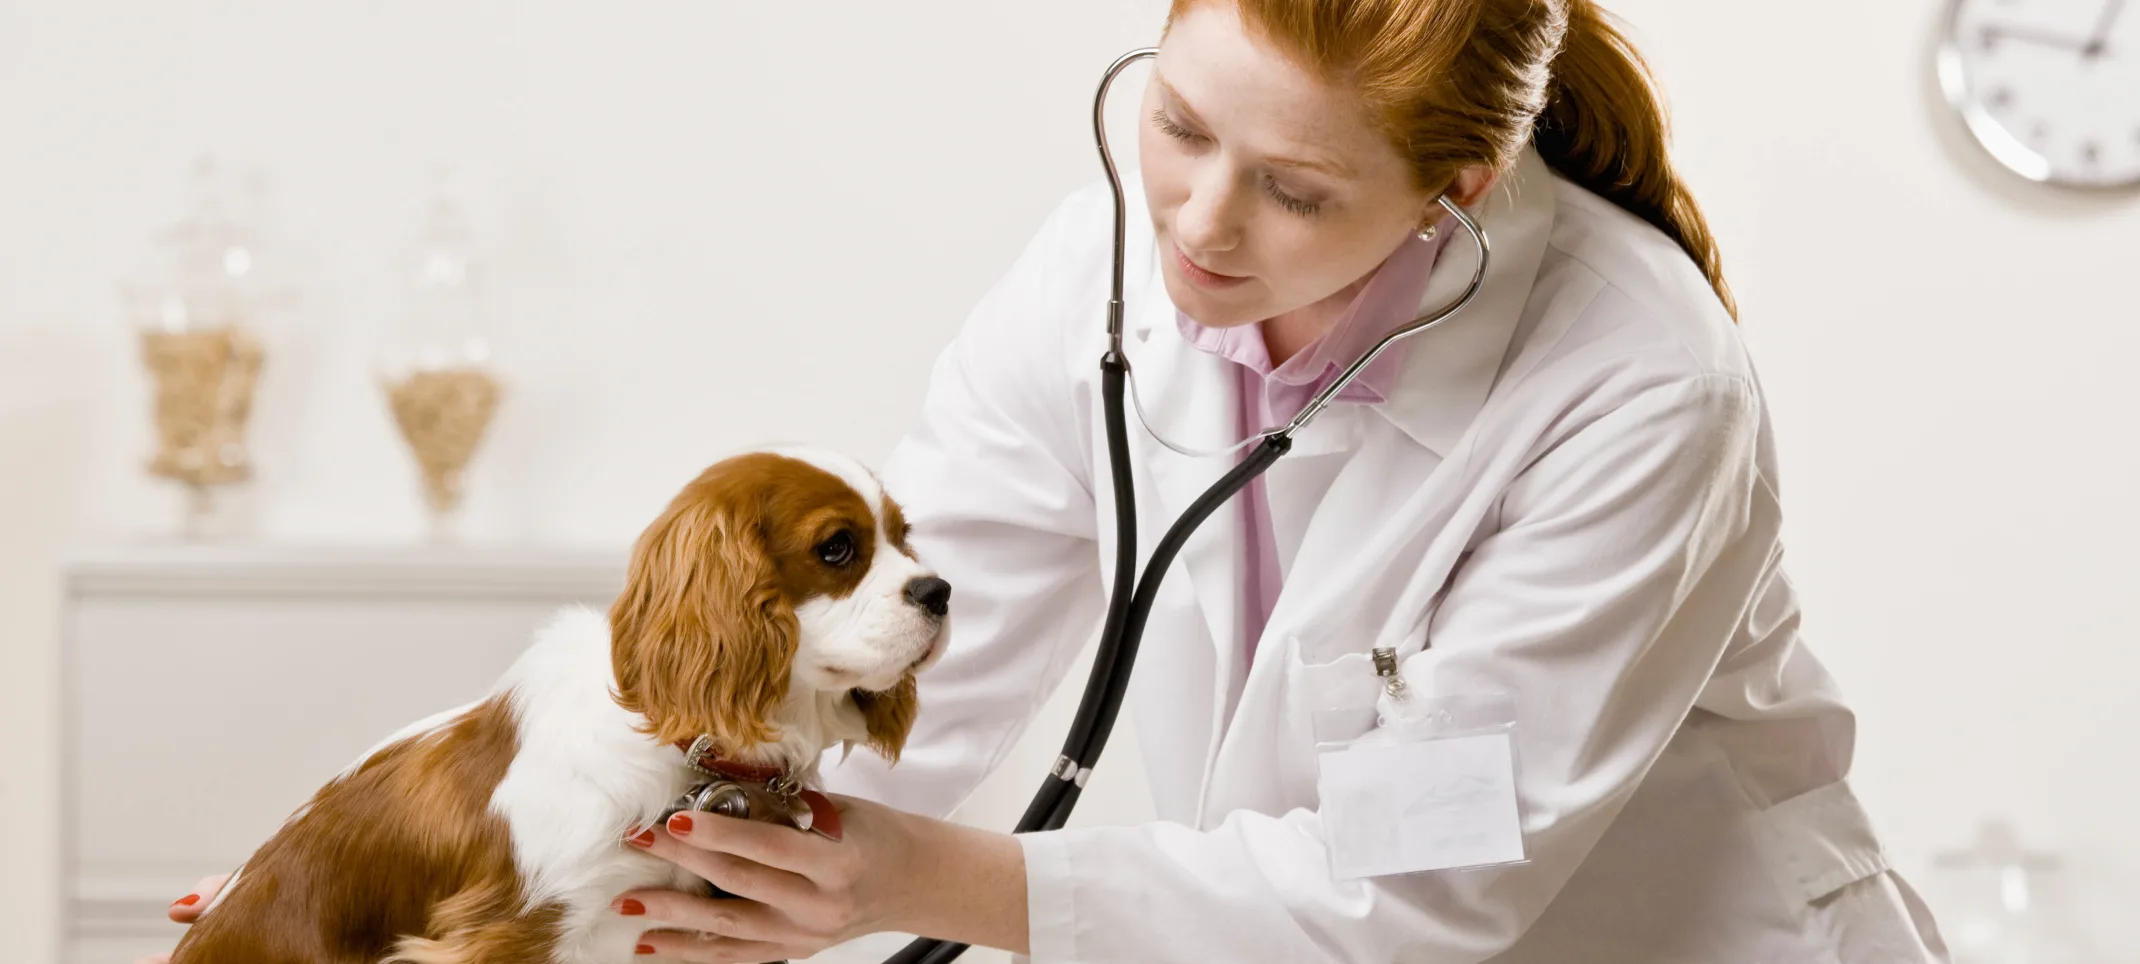 Emergency Pet Care: Rapid Response for Beloved Companions